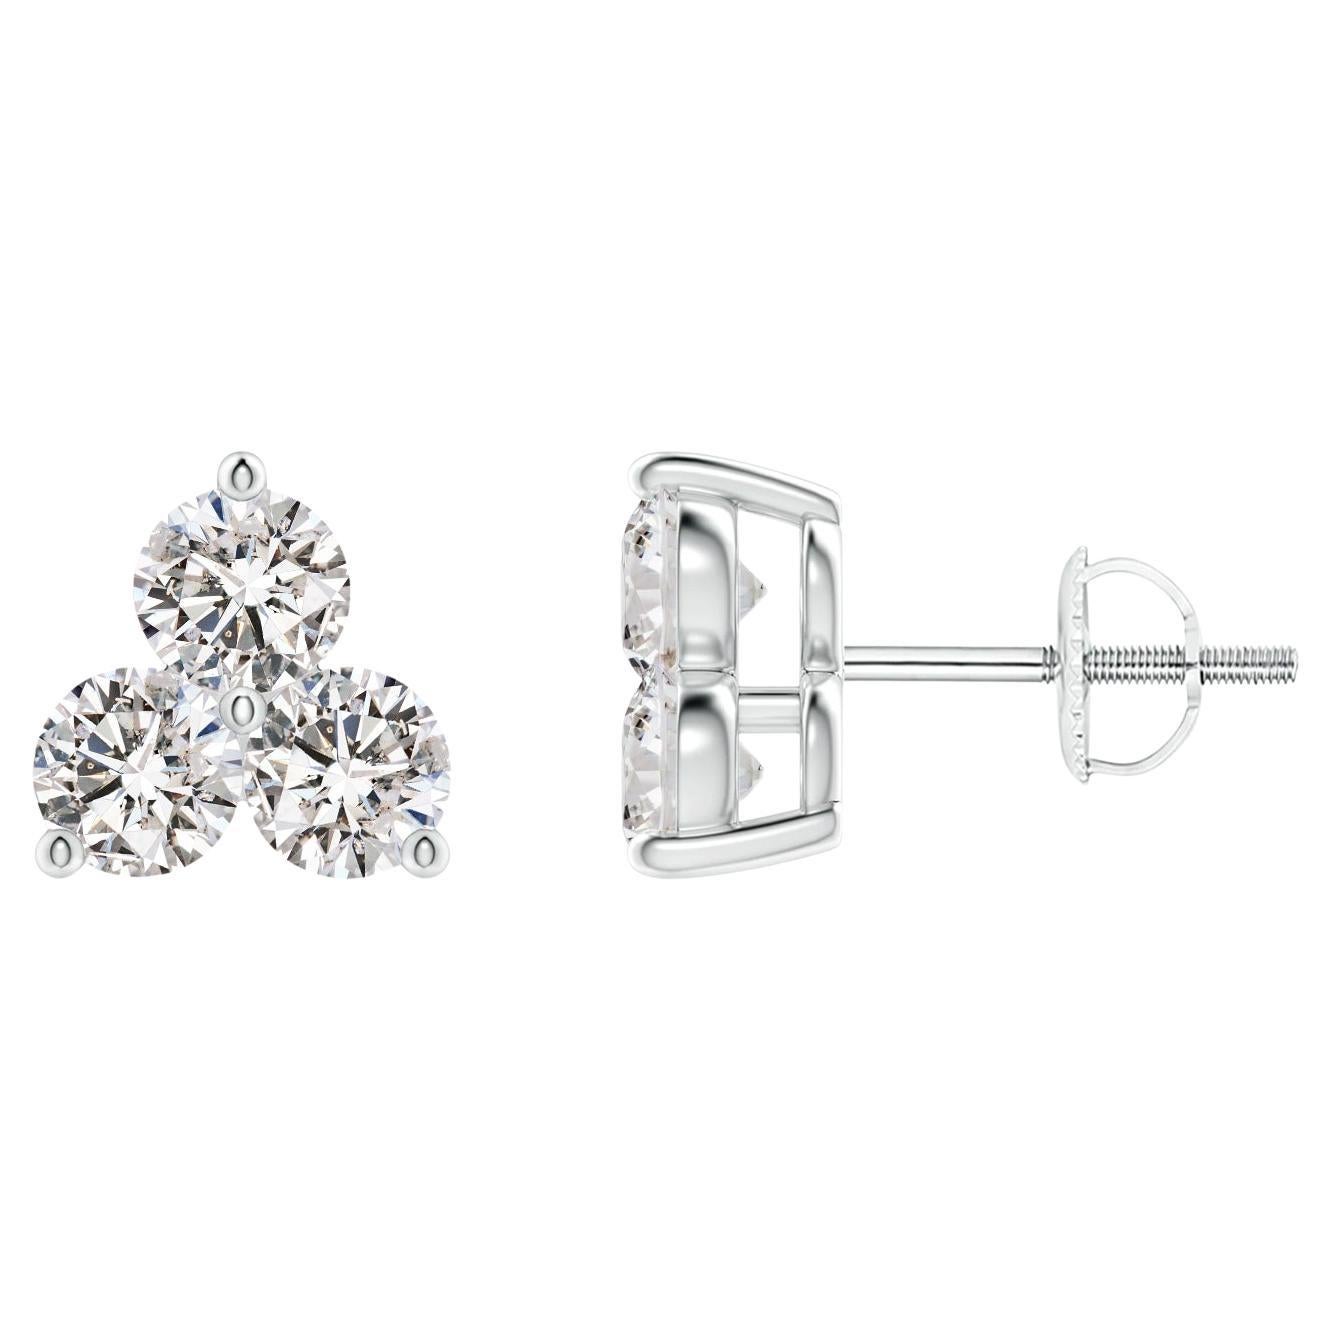 Natural Diamond Stud Earrings in 14K White Gold (0.75cttw Color-I-J) For Sale